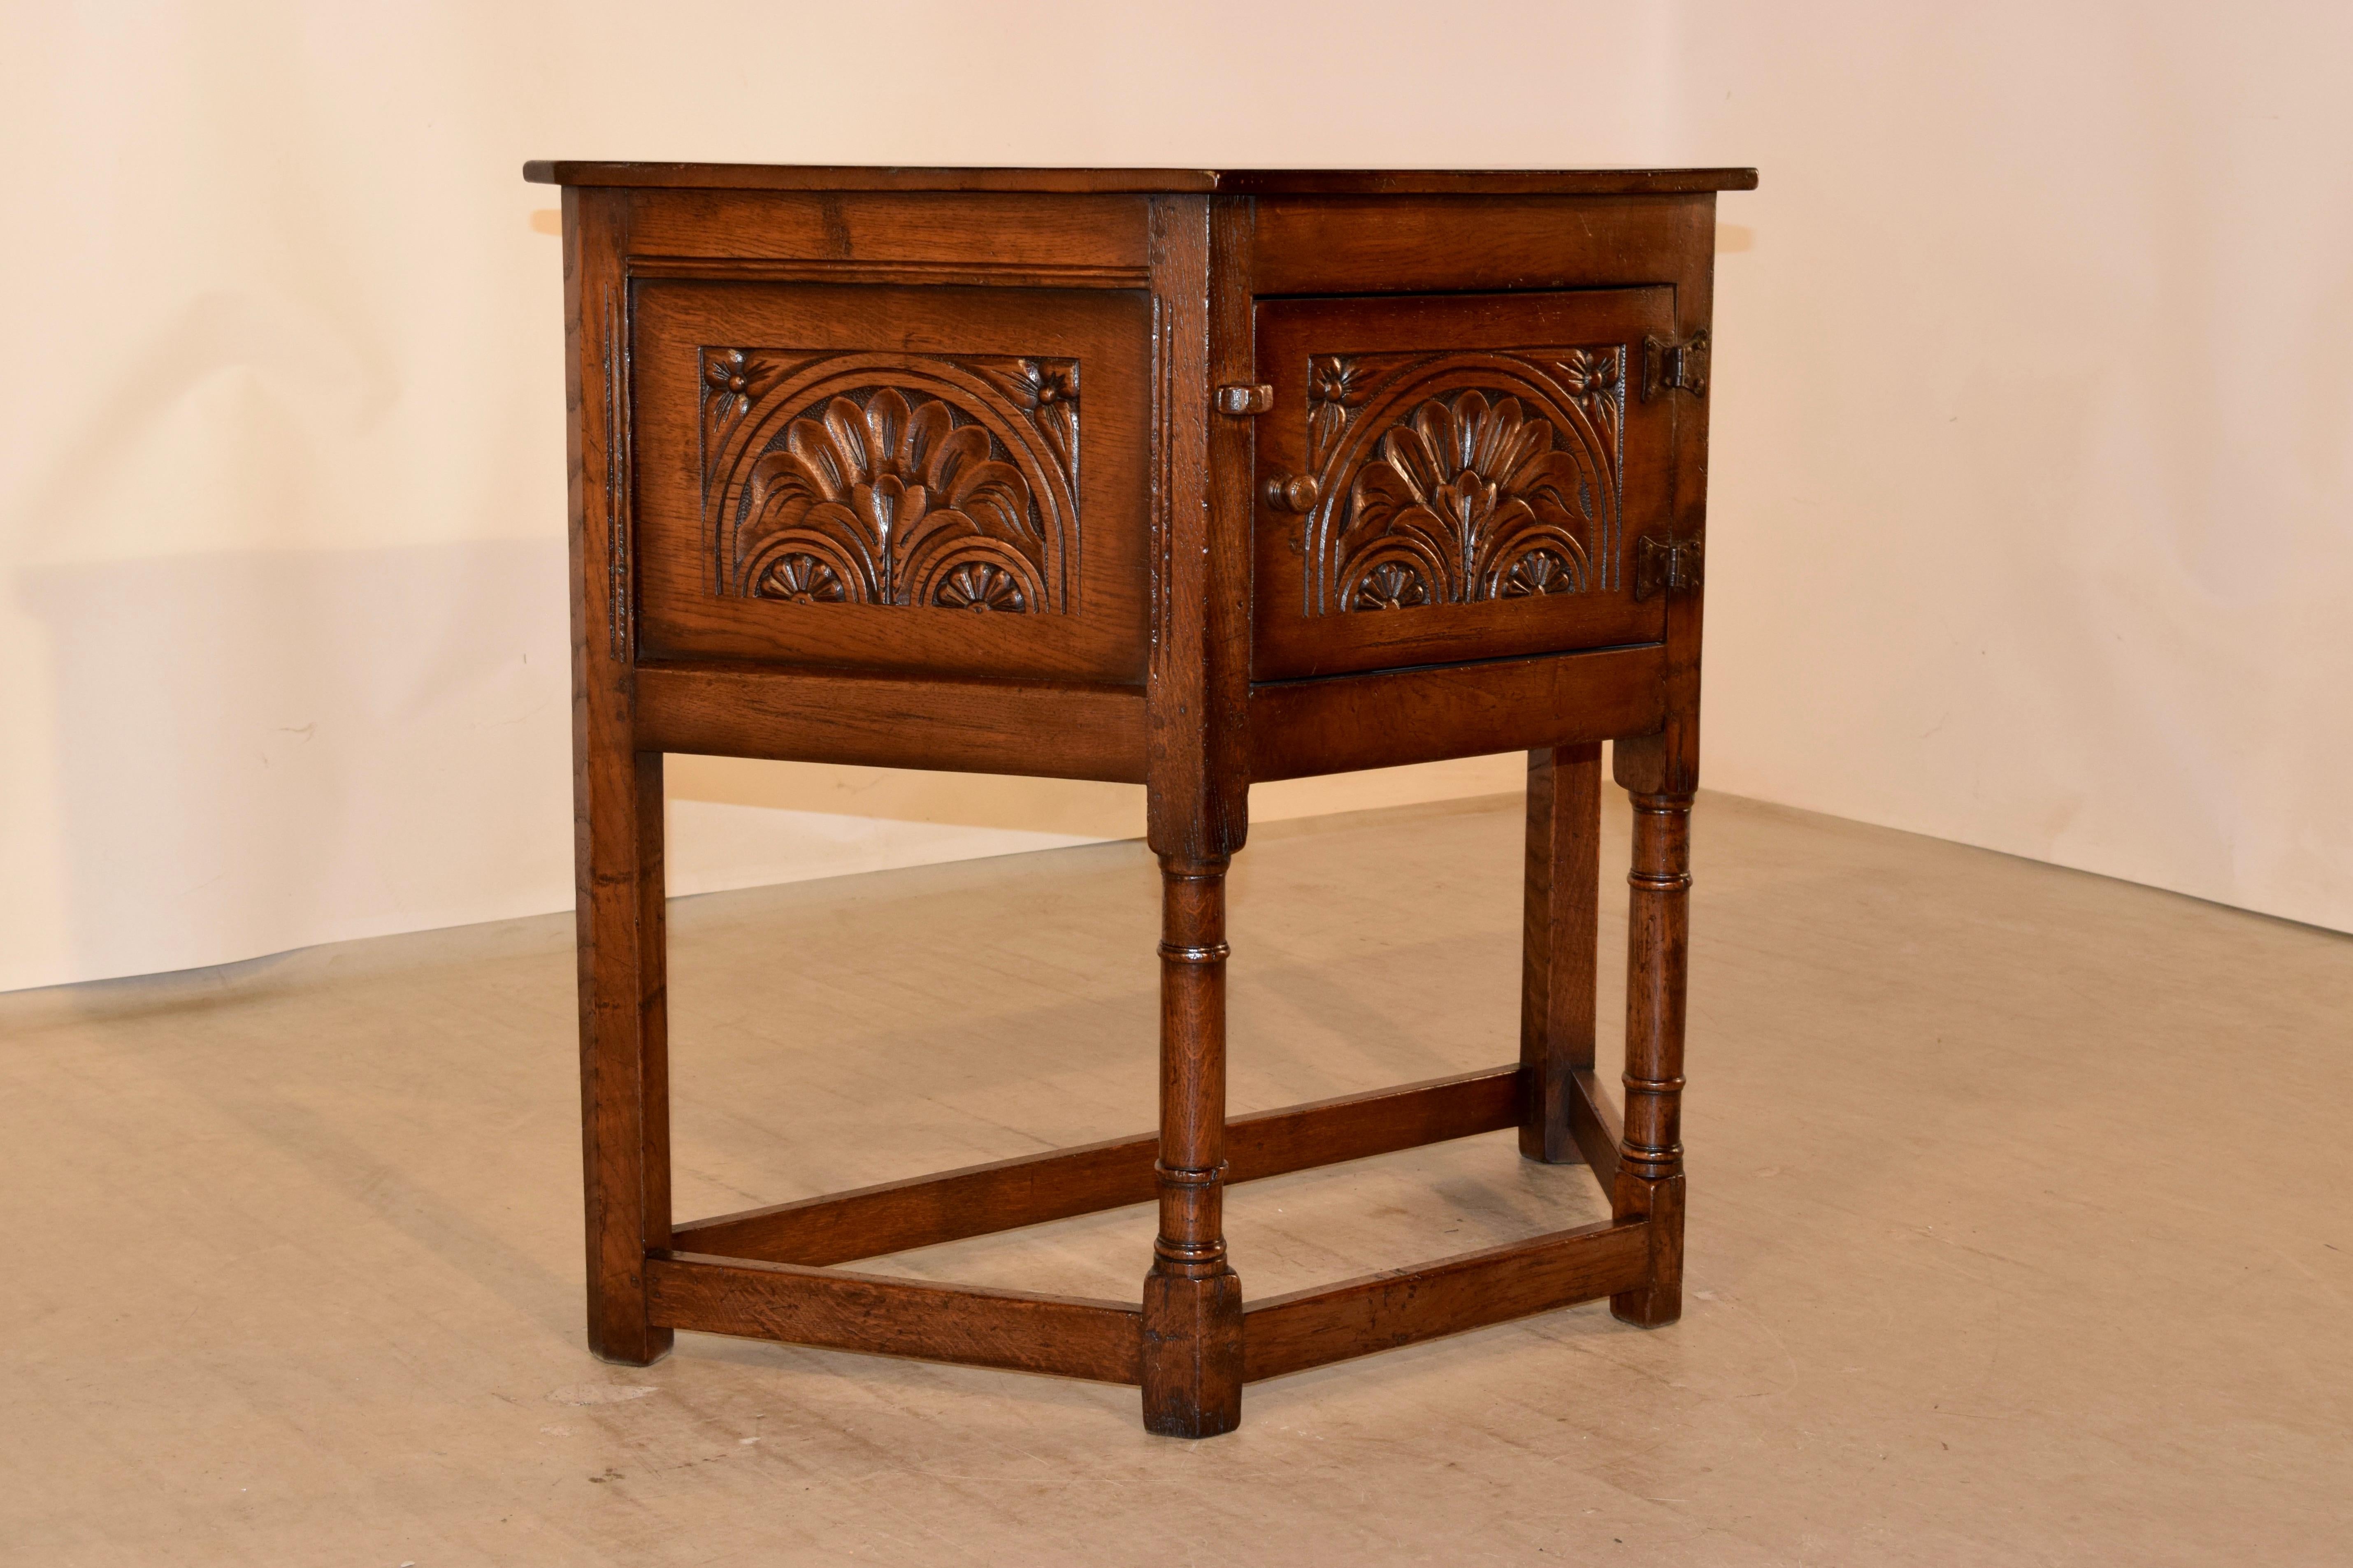 19th century English oak console table with a five-sided top following down to paneled sides with hand carved decorations and a single carved door with handmade hinges which opens to reveal storage. The piece is supported on hand turned legs, joined